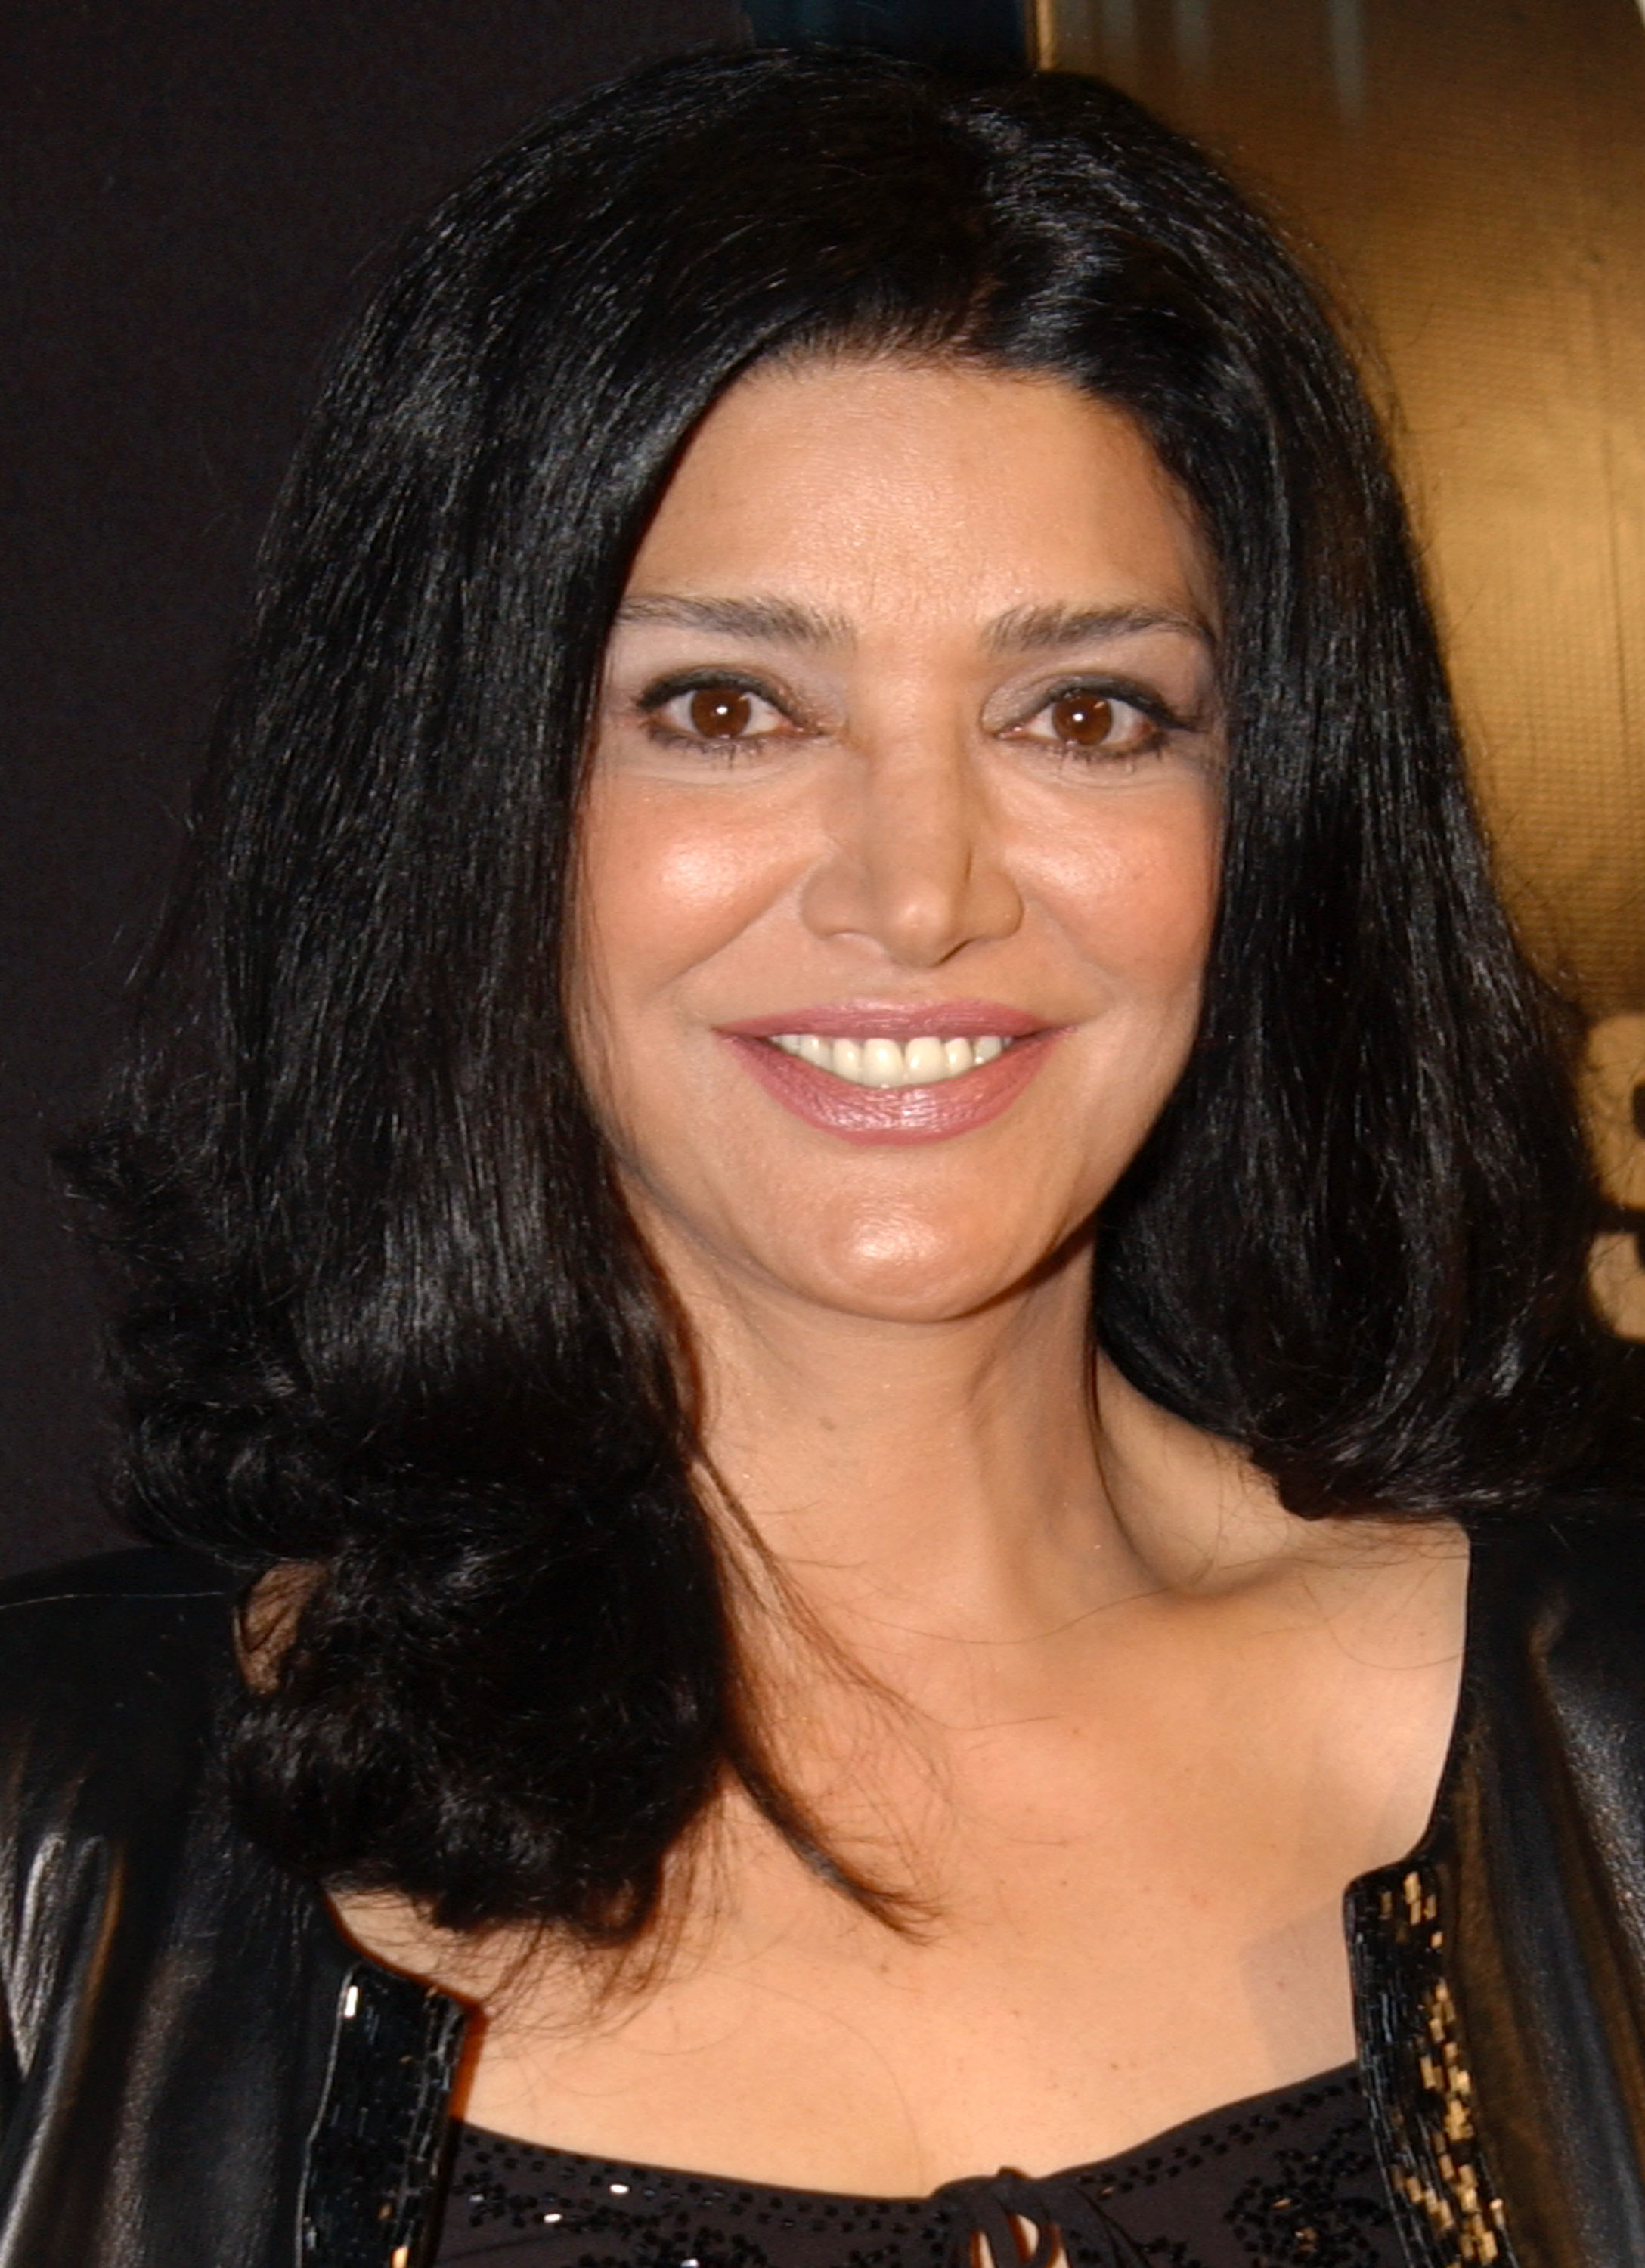 shohreh-aghdashloo-pictures